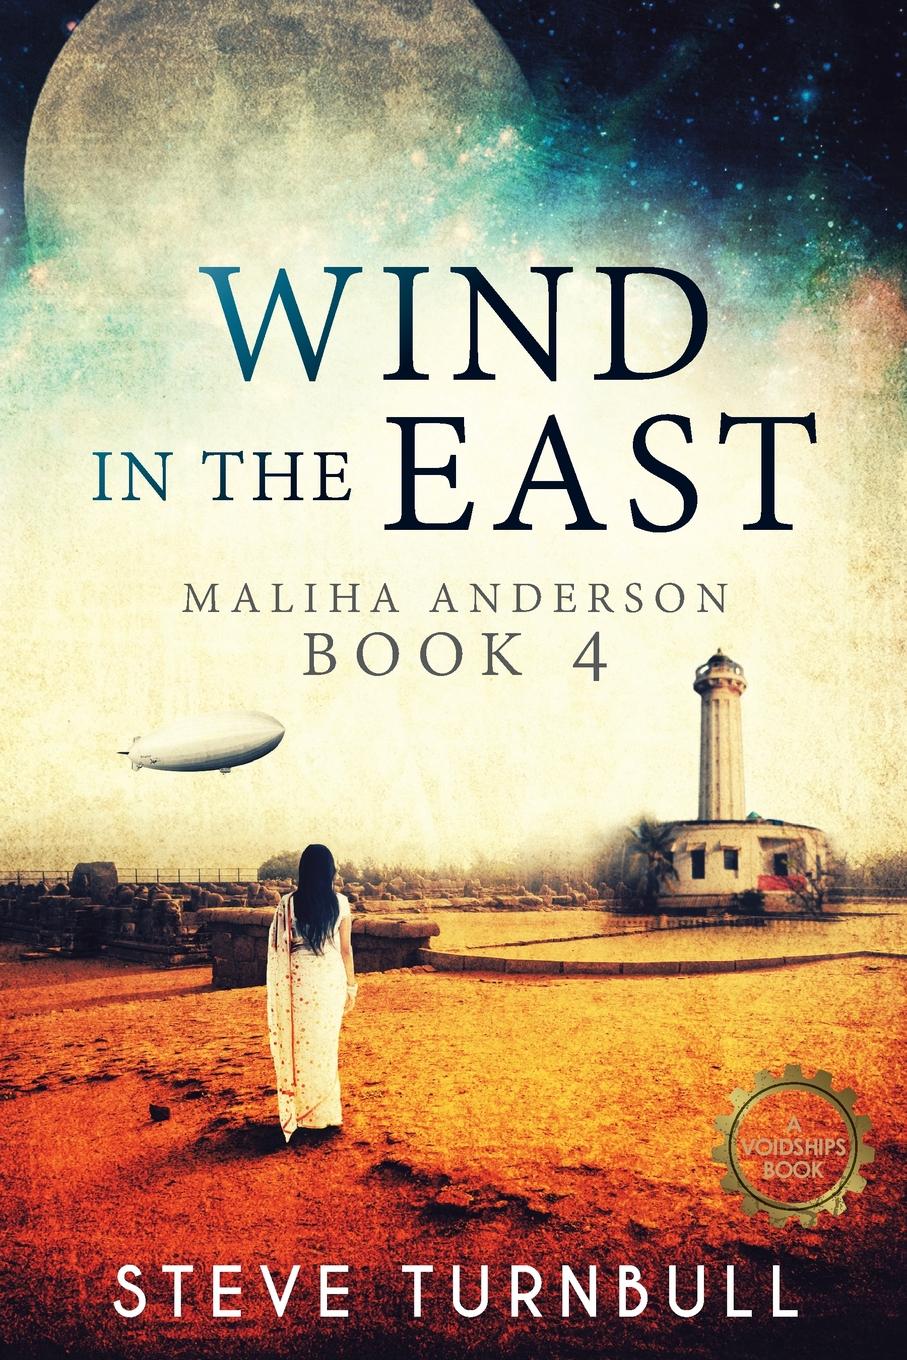 Wind in the East. Maliha Anderson, Book 4